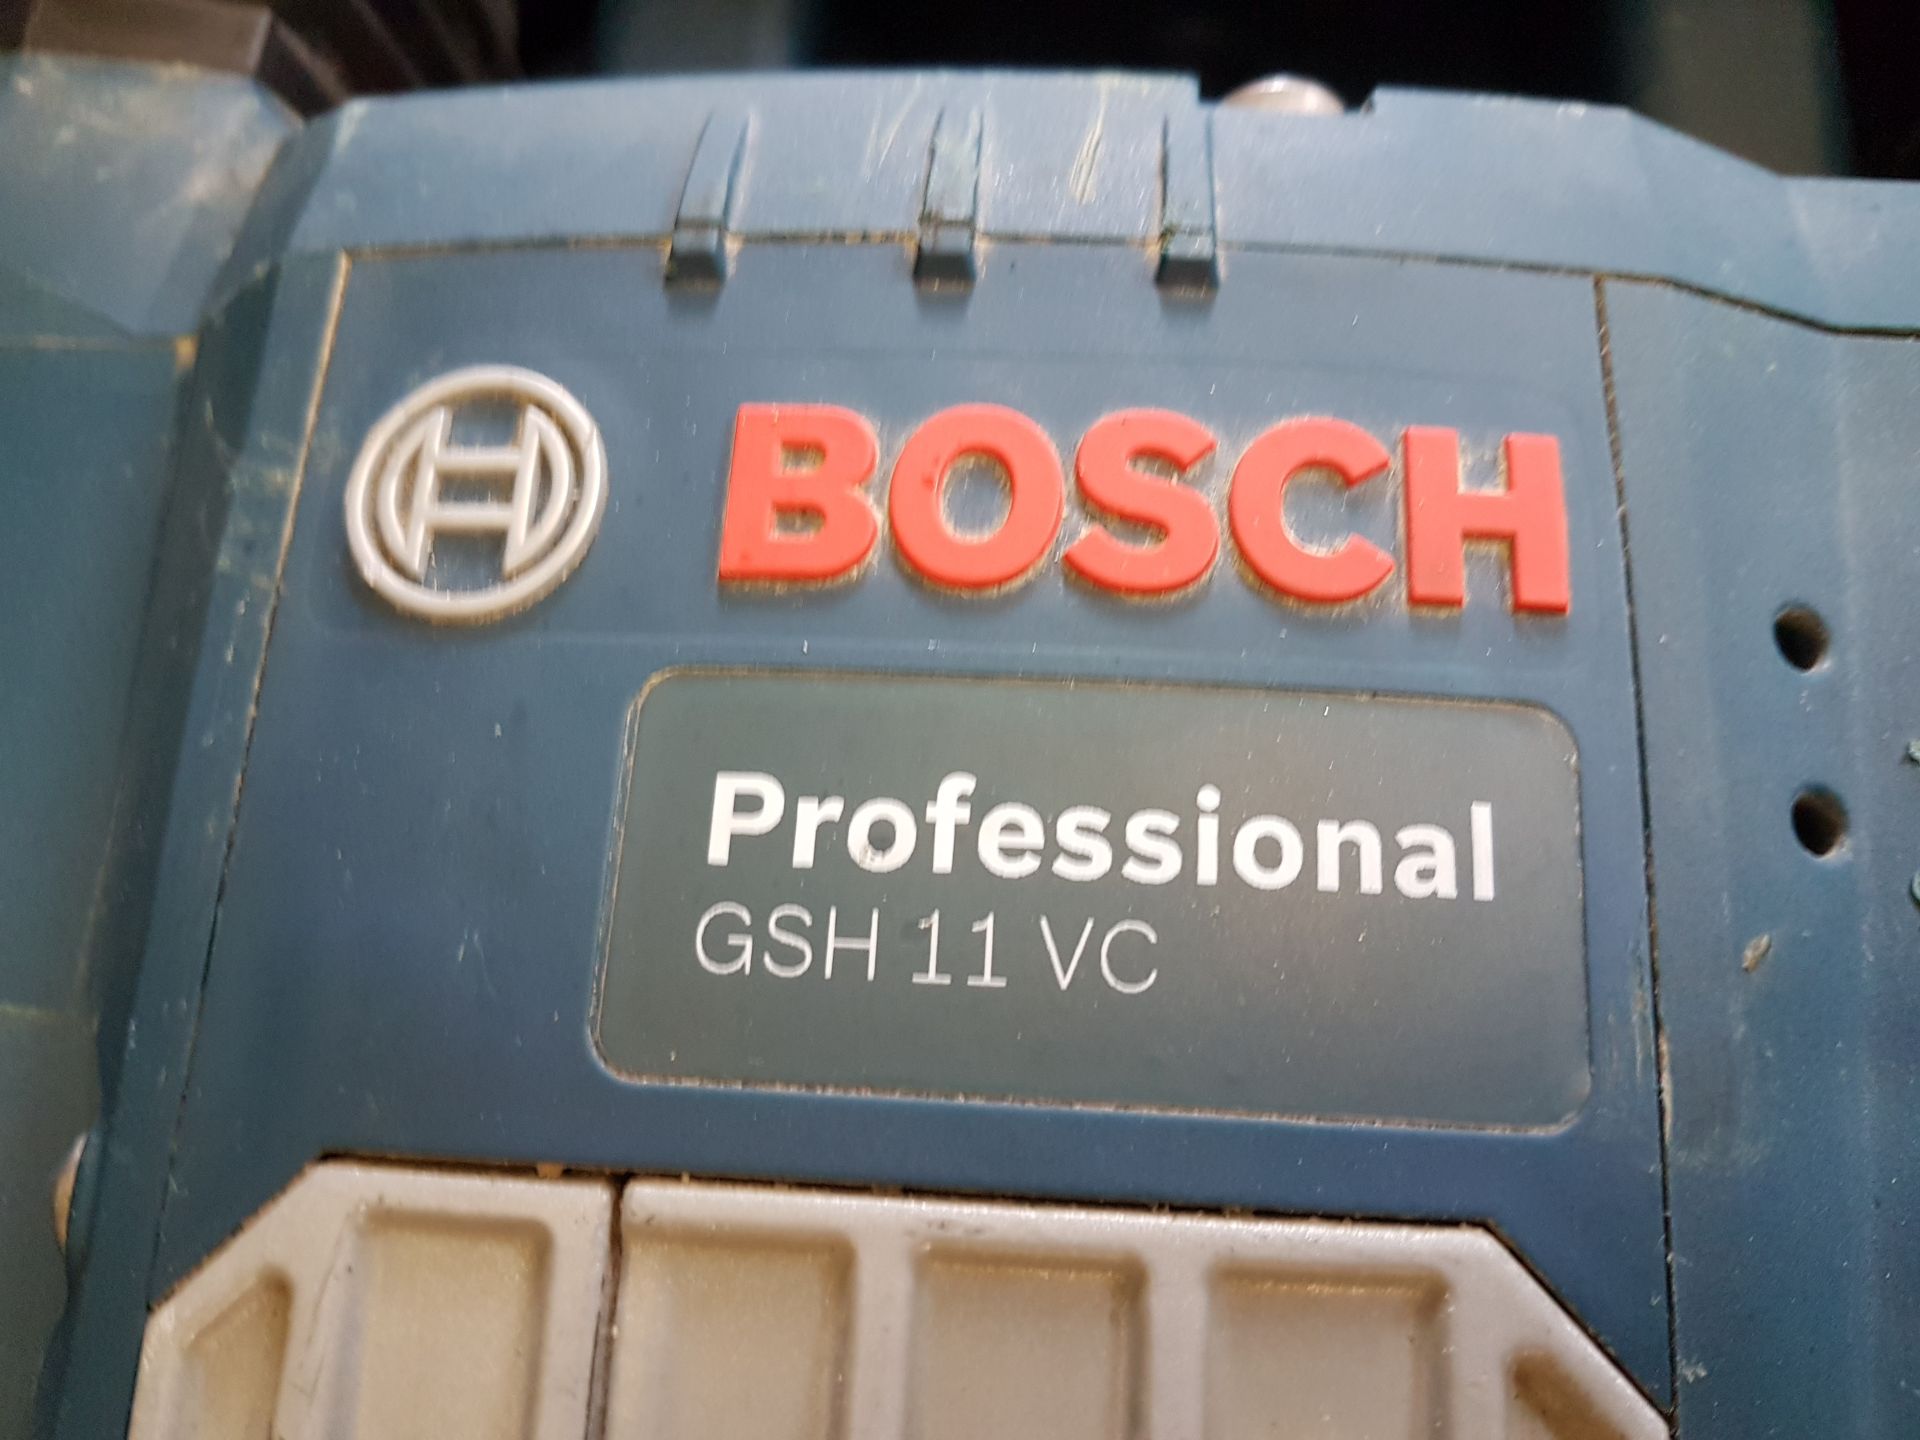 Bosch GSH 11VC Medium Concrete Breaker with Chisel 110v in Box - Tested / In Working Order - Image 2 of 2